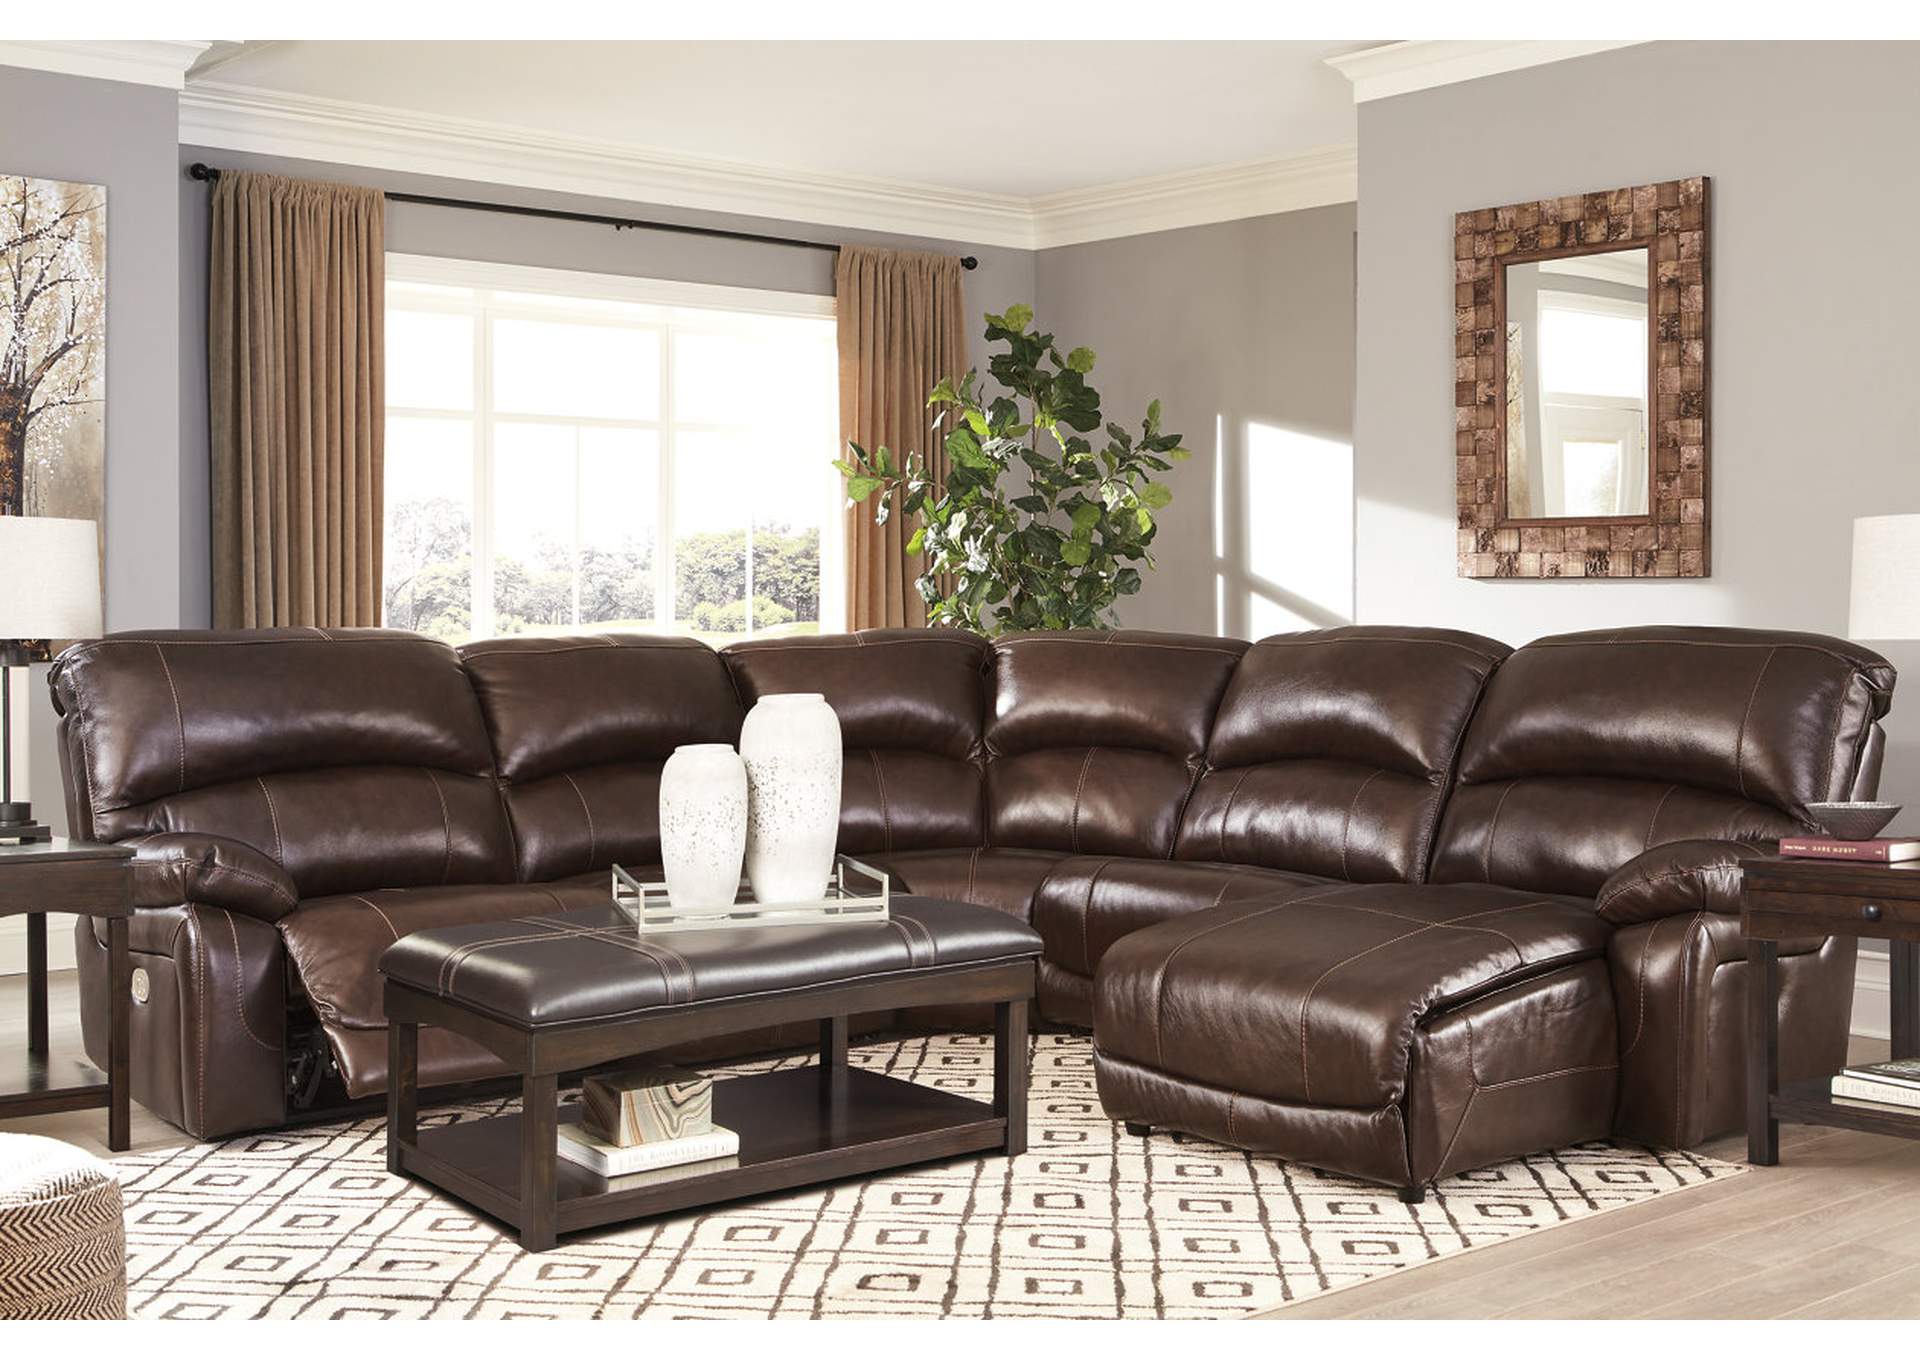 Hallstrung 5-Piece Power Reclining Sectional with Chaise,Signature Design By Ashley